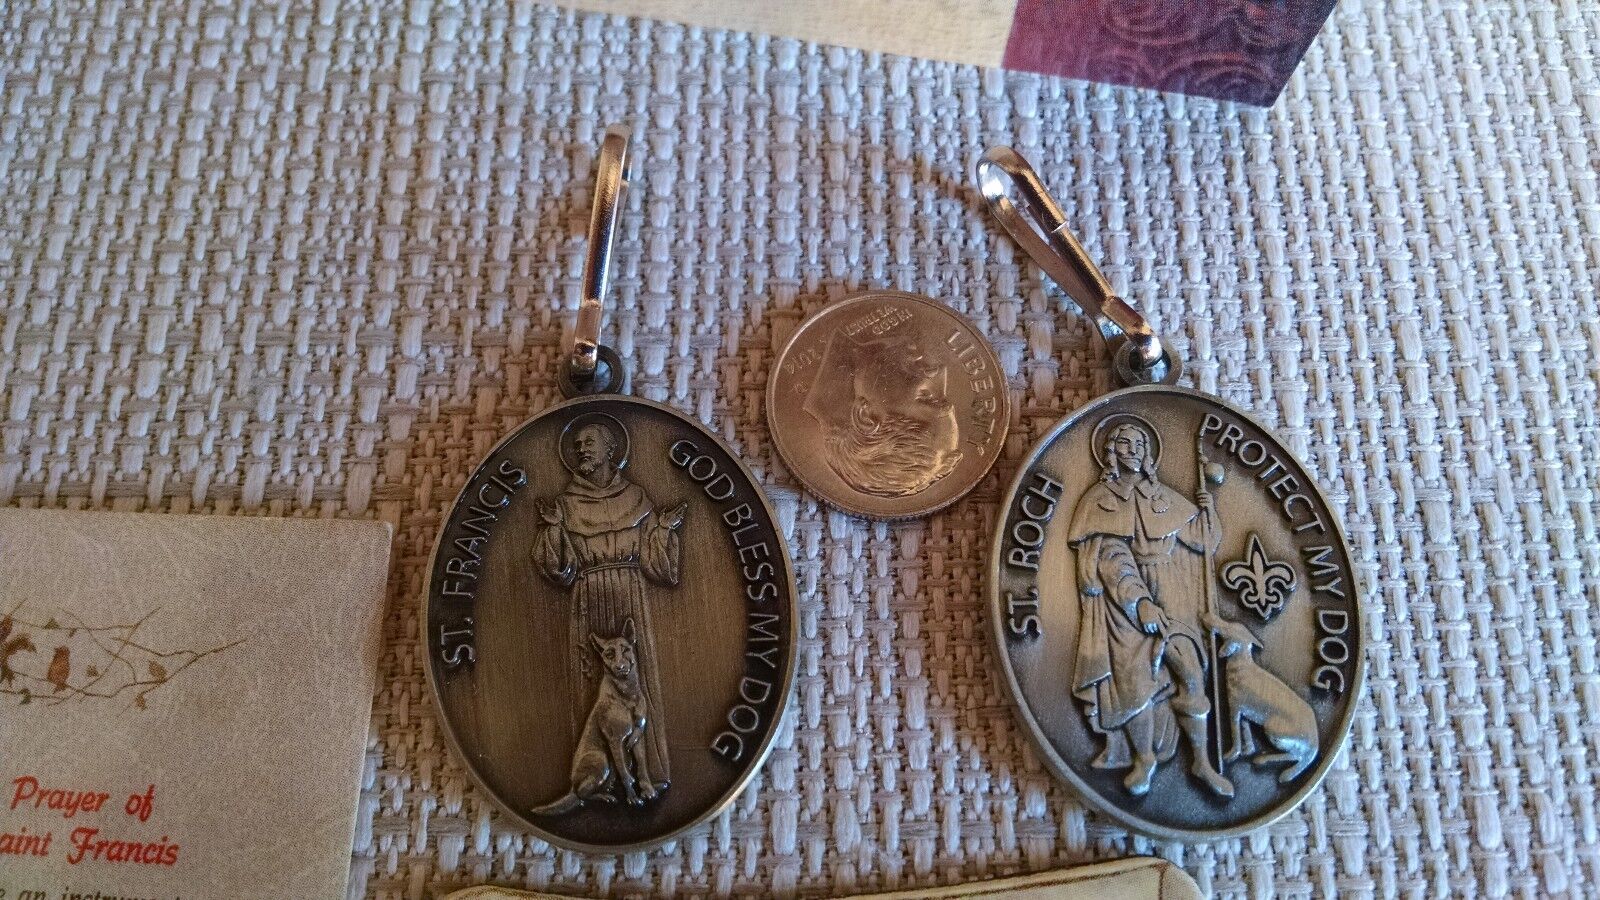 St FRANCIS / ST ROCH Pet Dog Medal  with Felix  New  Orleans  Design ,and a gift